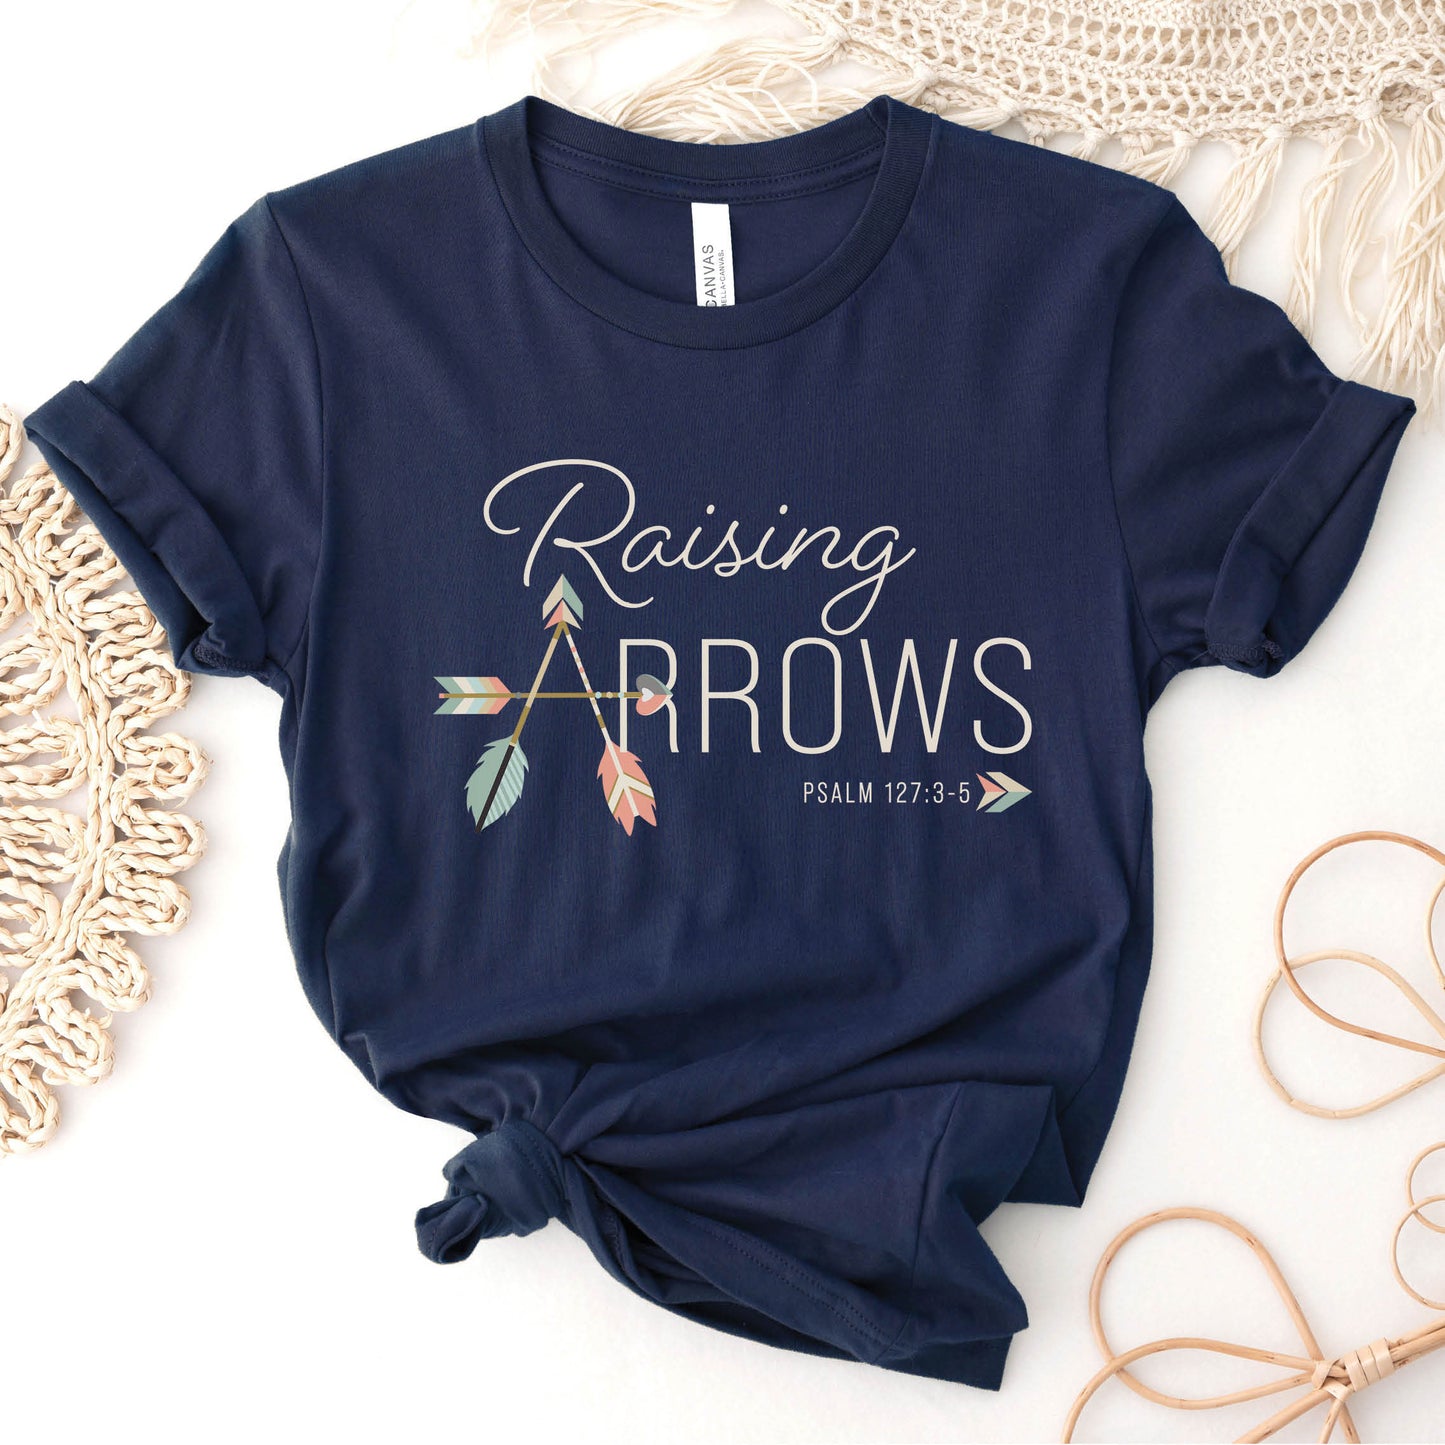 Navy blue and pastel boho arrow Christian aesthetic faith-based t-shirt with Psalm 127:3-5 bible verse quote that says "Raising Arrows" blessed is the one with a quiver full of children, perfect for homeschool moms and kids